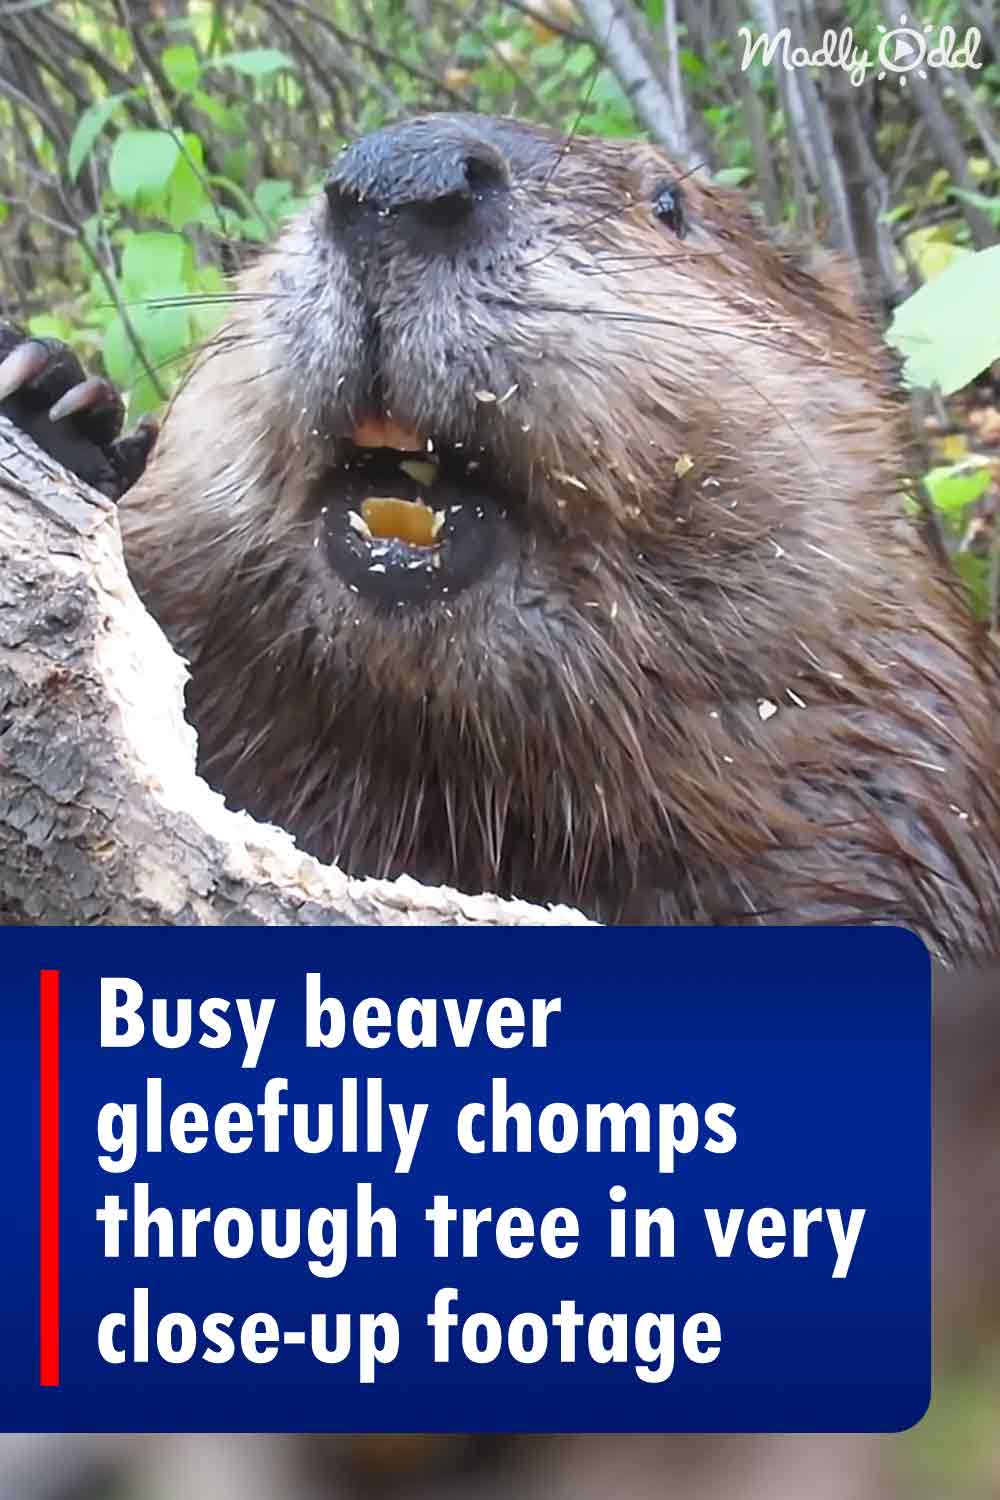 Busy beaver gleefully chomps through tree in very close-up footage